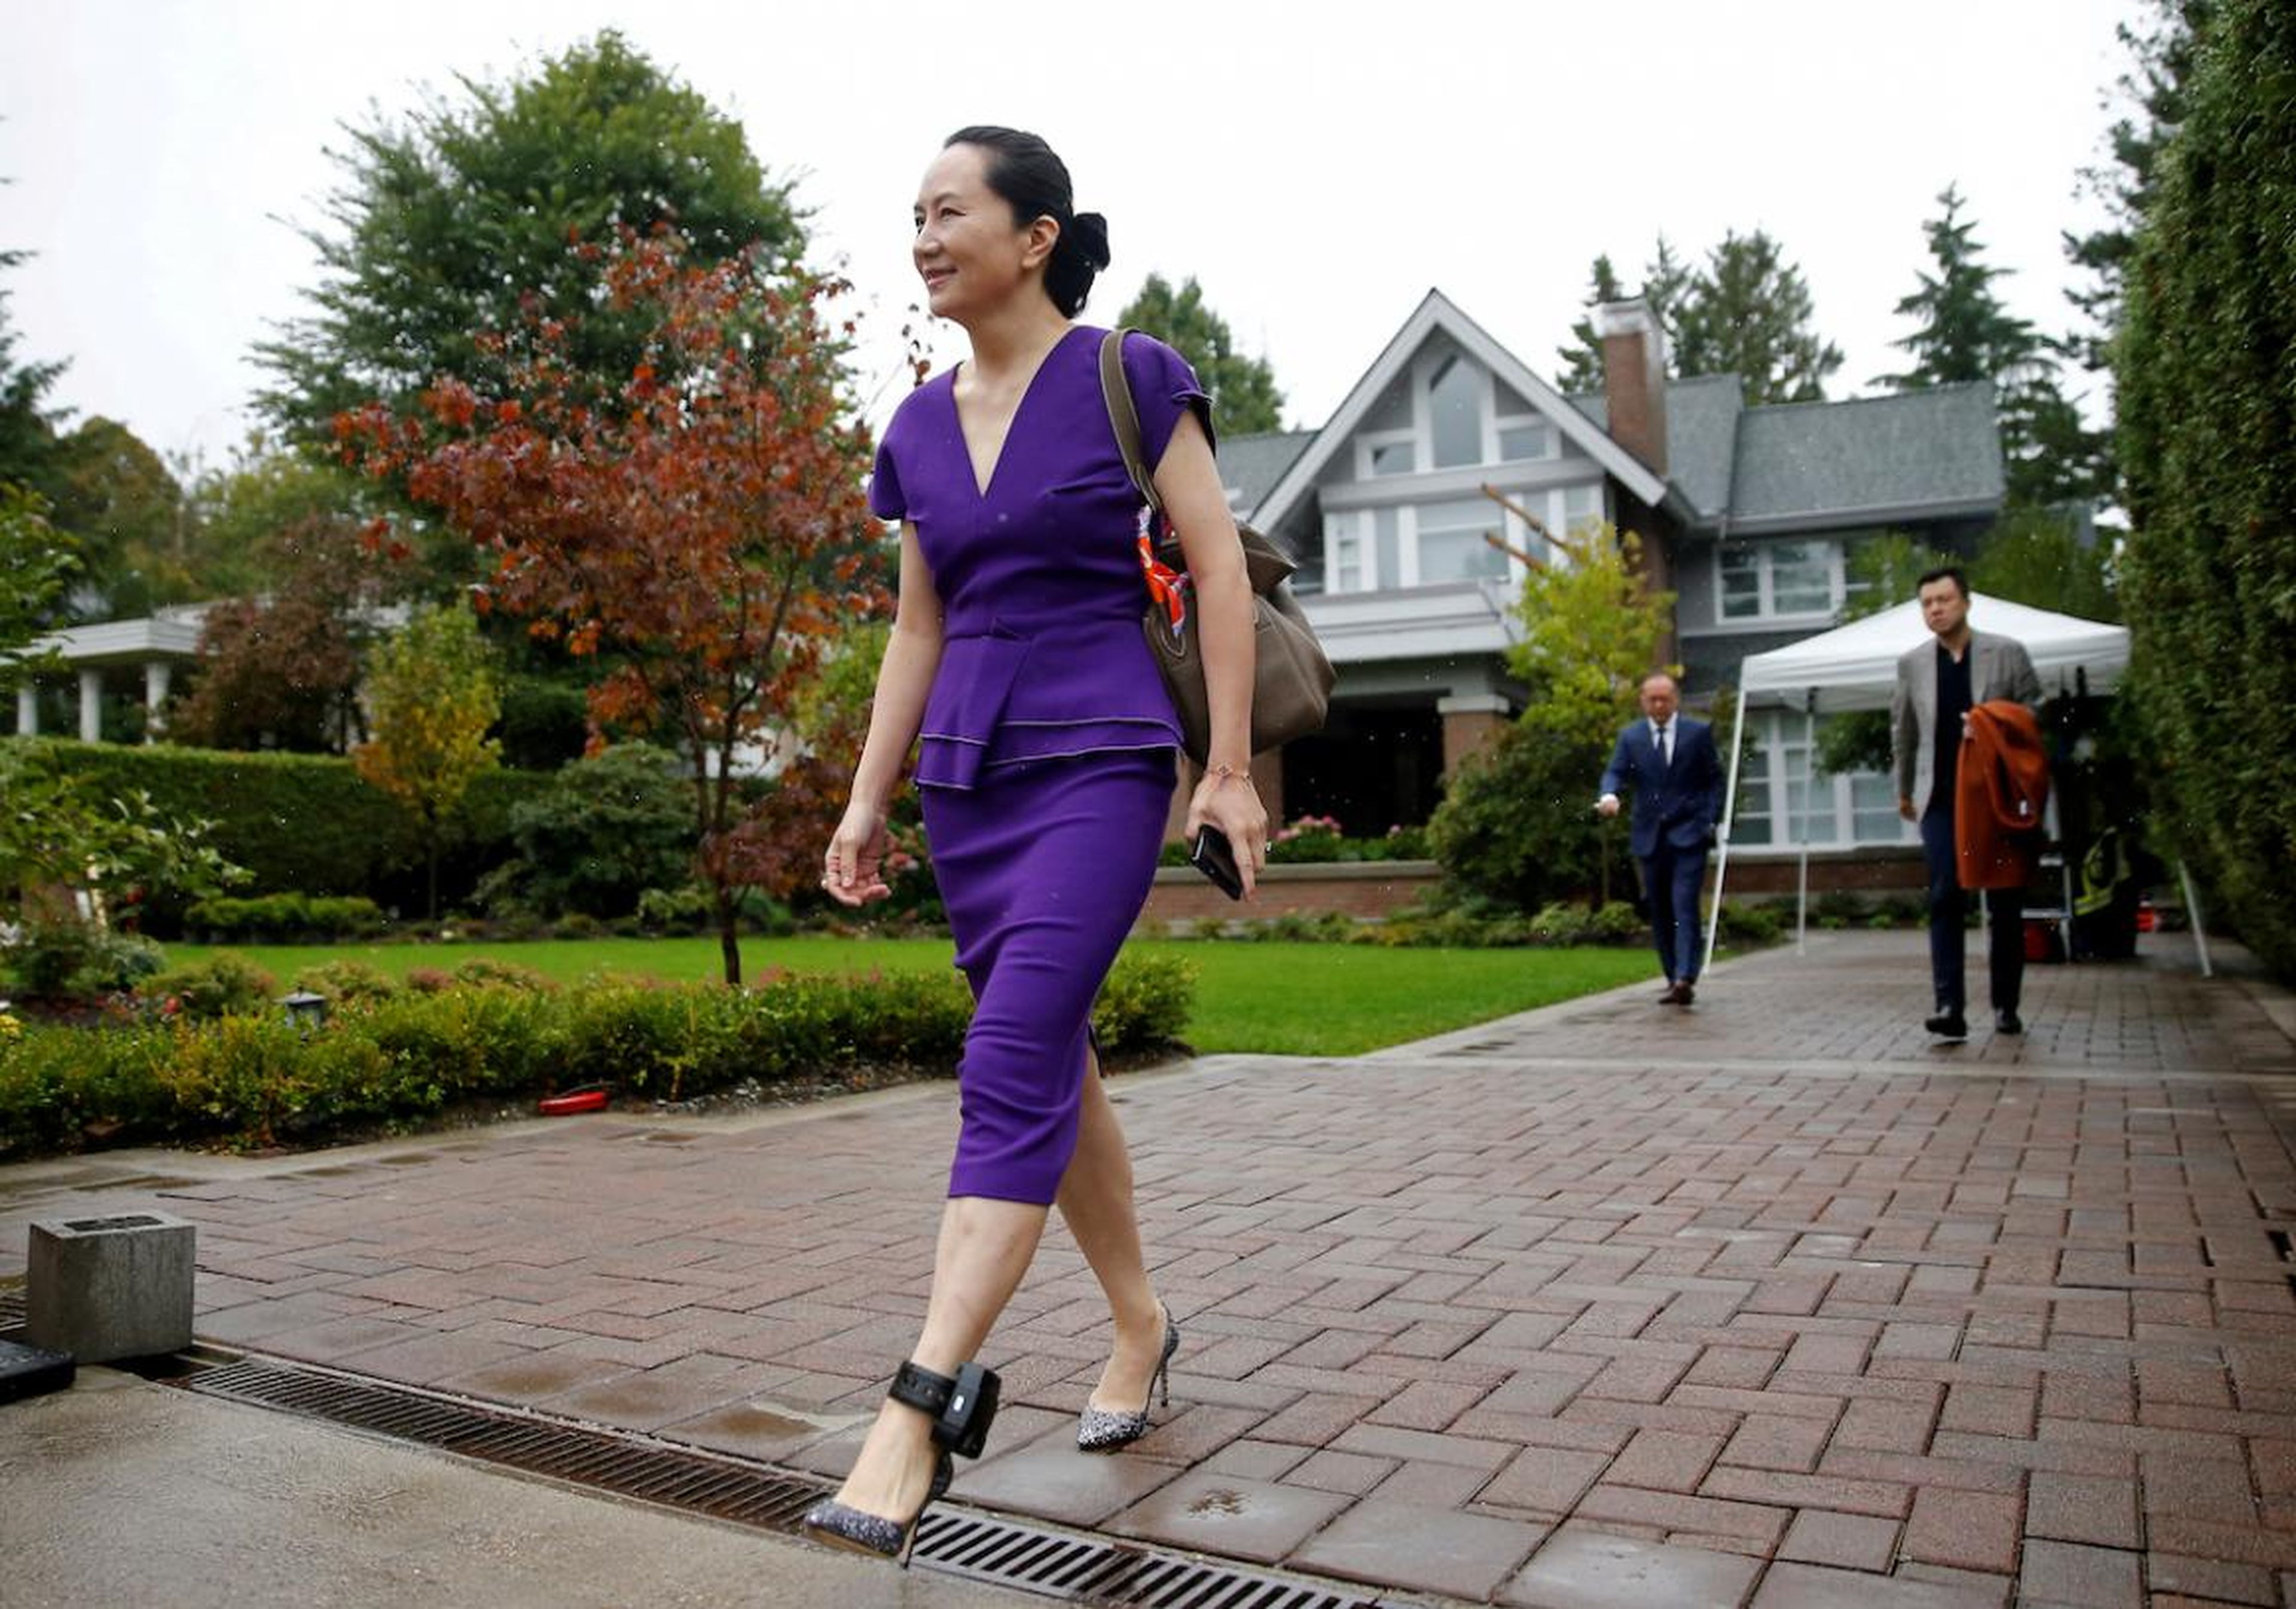 Huawei Technologies Chief Financial Officer Meng Wanzhou leaves her home to appear at a hearing at the Supreme Court of British Columbia in Vancouver, Canada on September 23. Wanzhou was arrested in December 2018 in Vancouver on